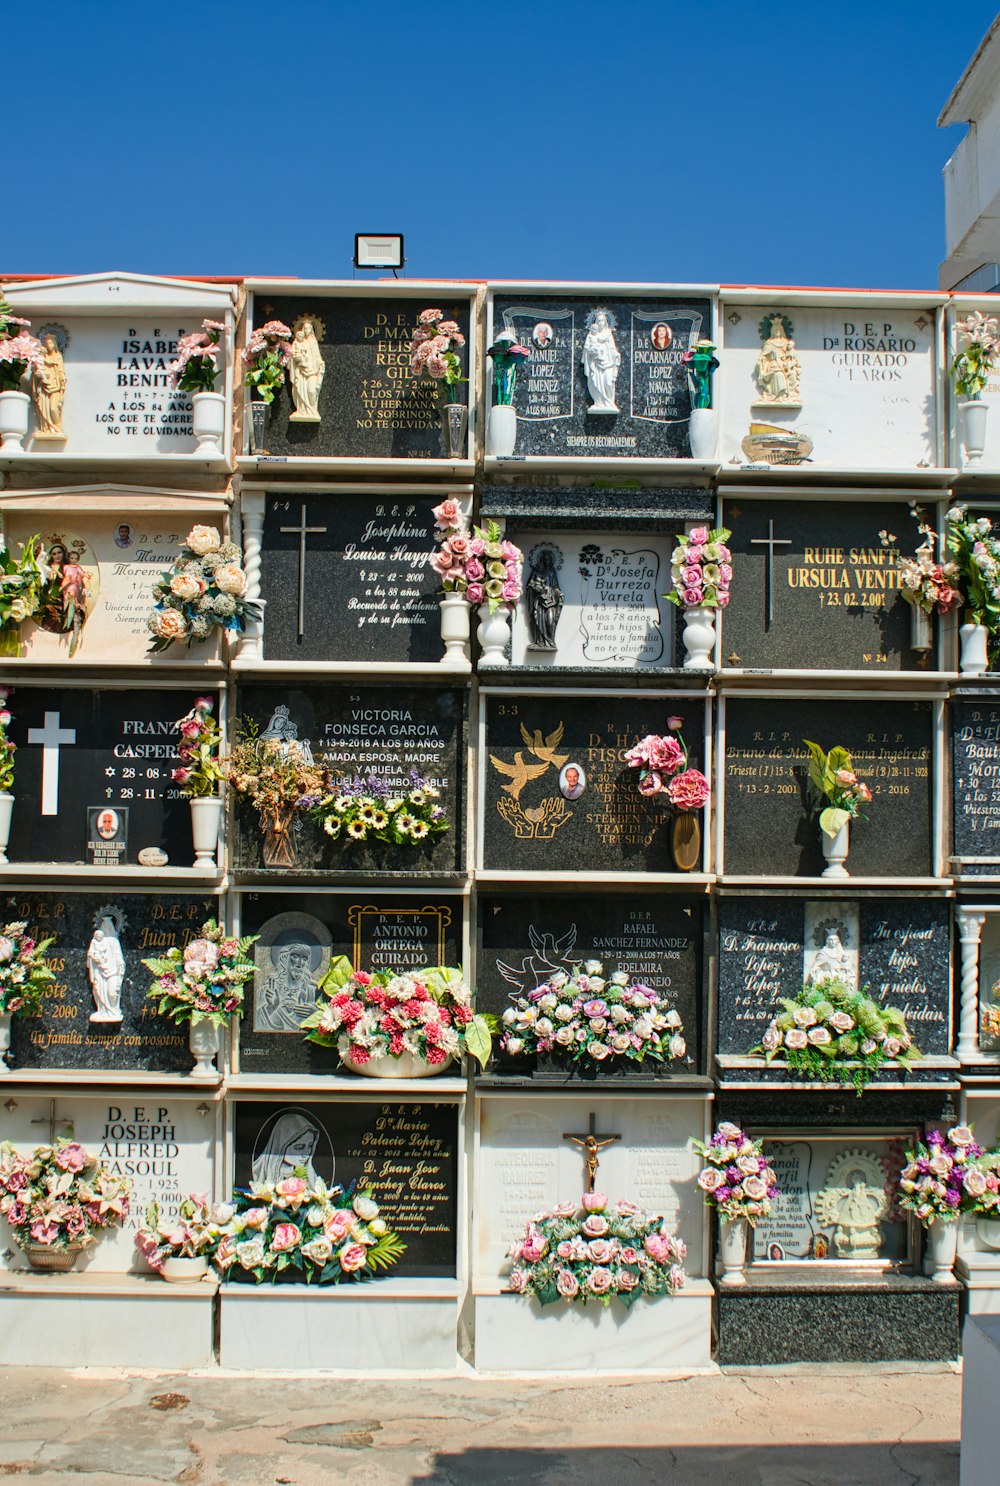 a memorial wall with flowers and plaques on it